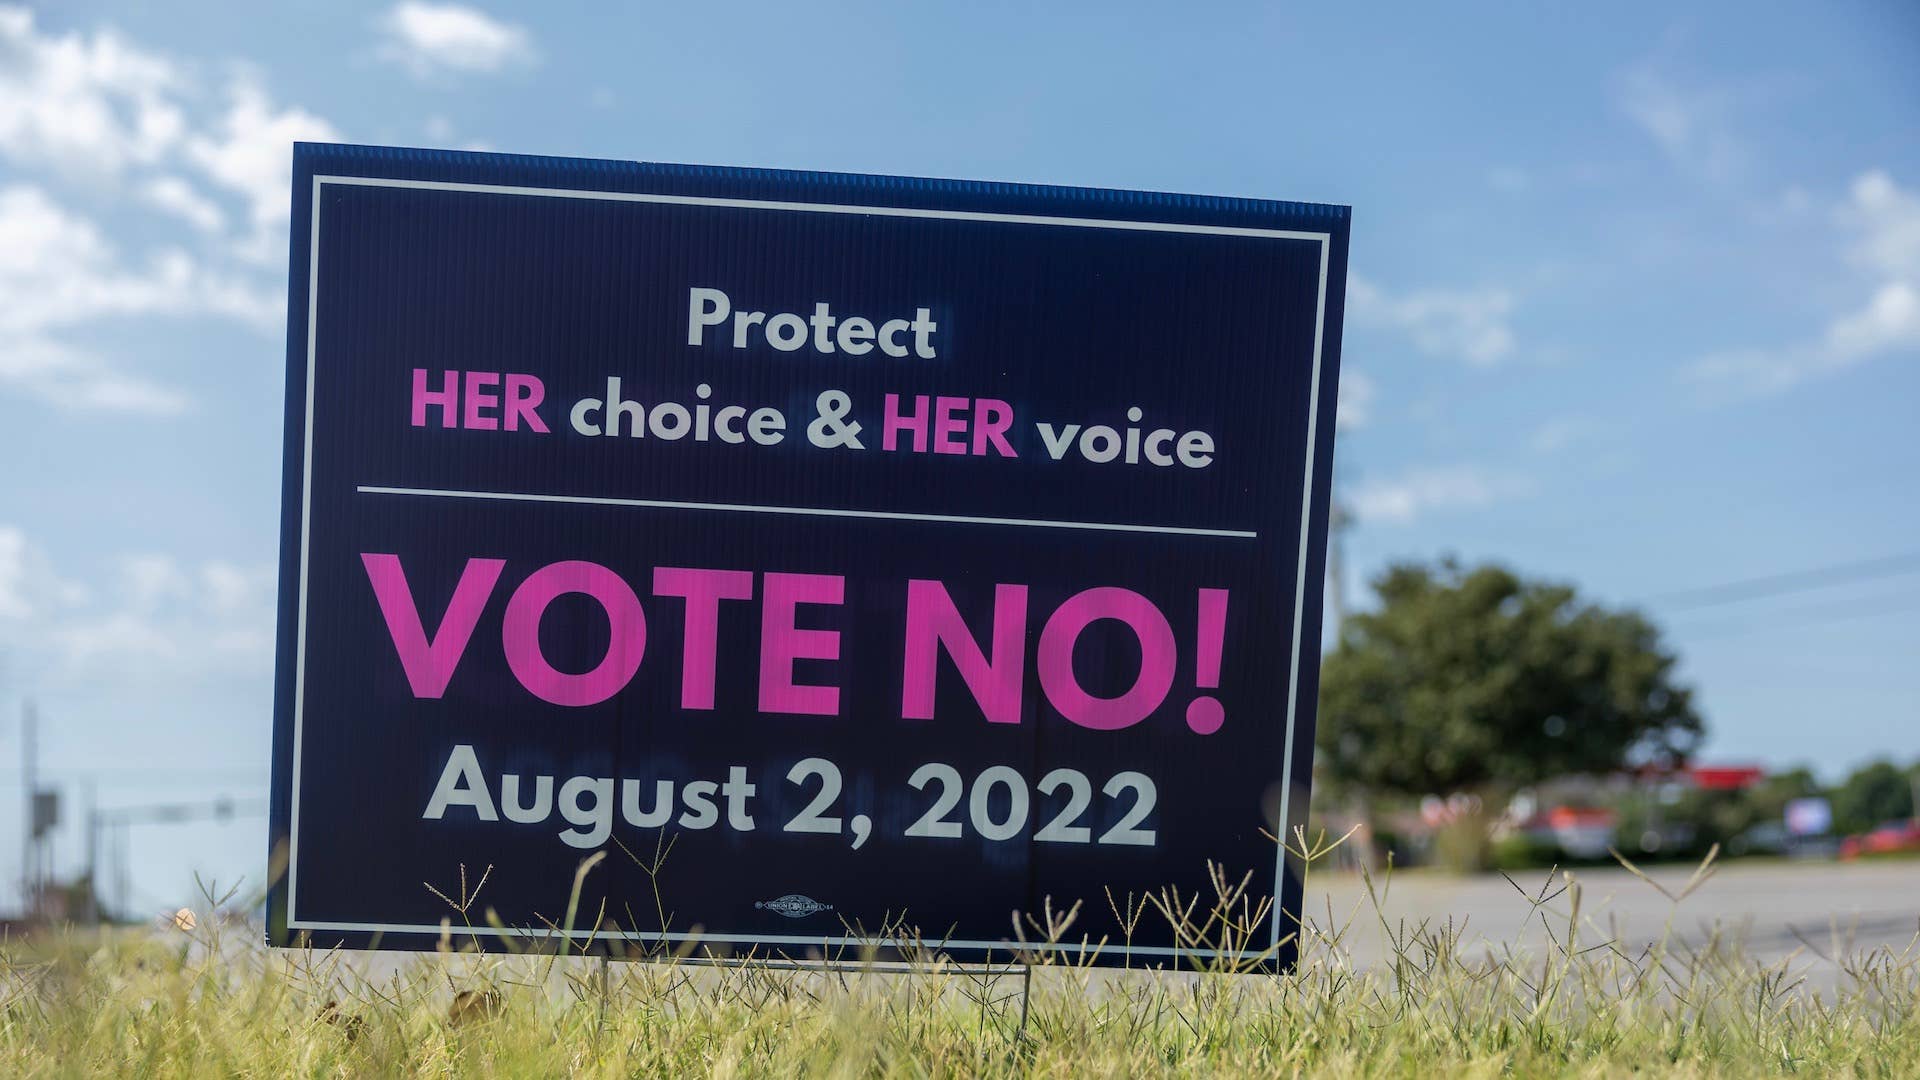 A pro choice election sign is seen in Wichita, Kansas